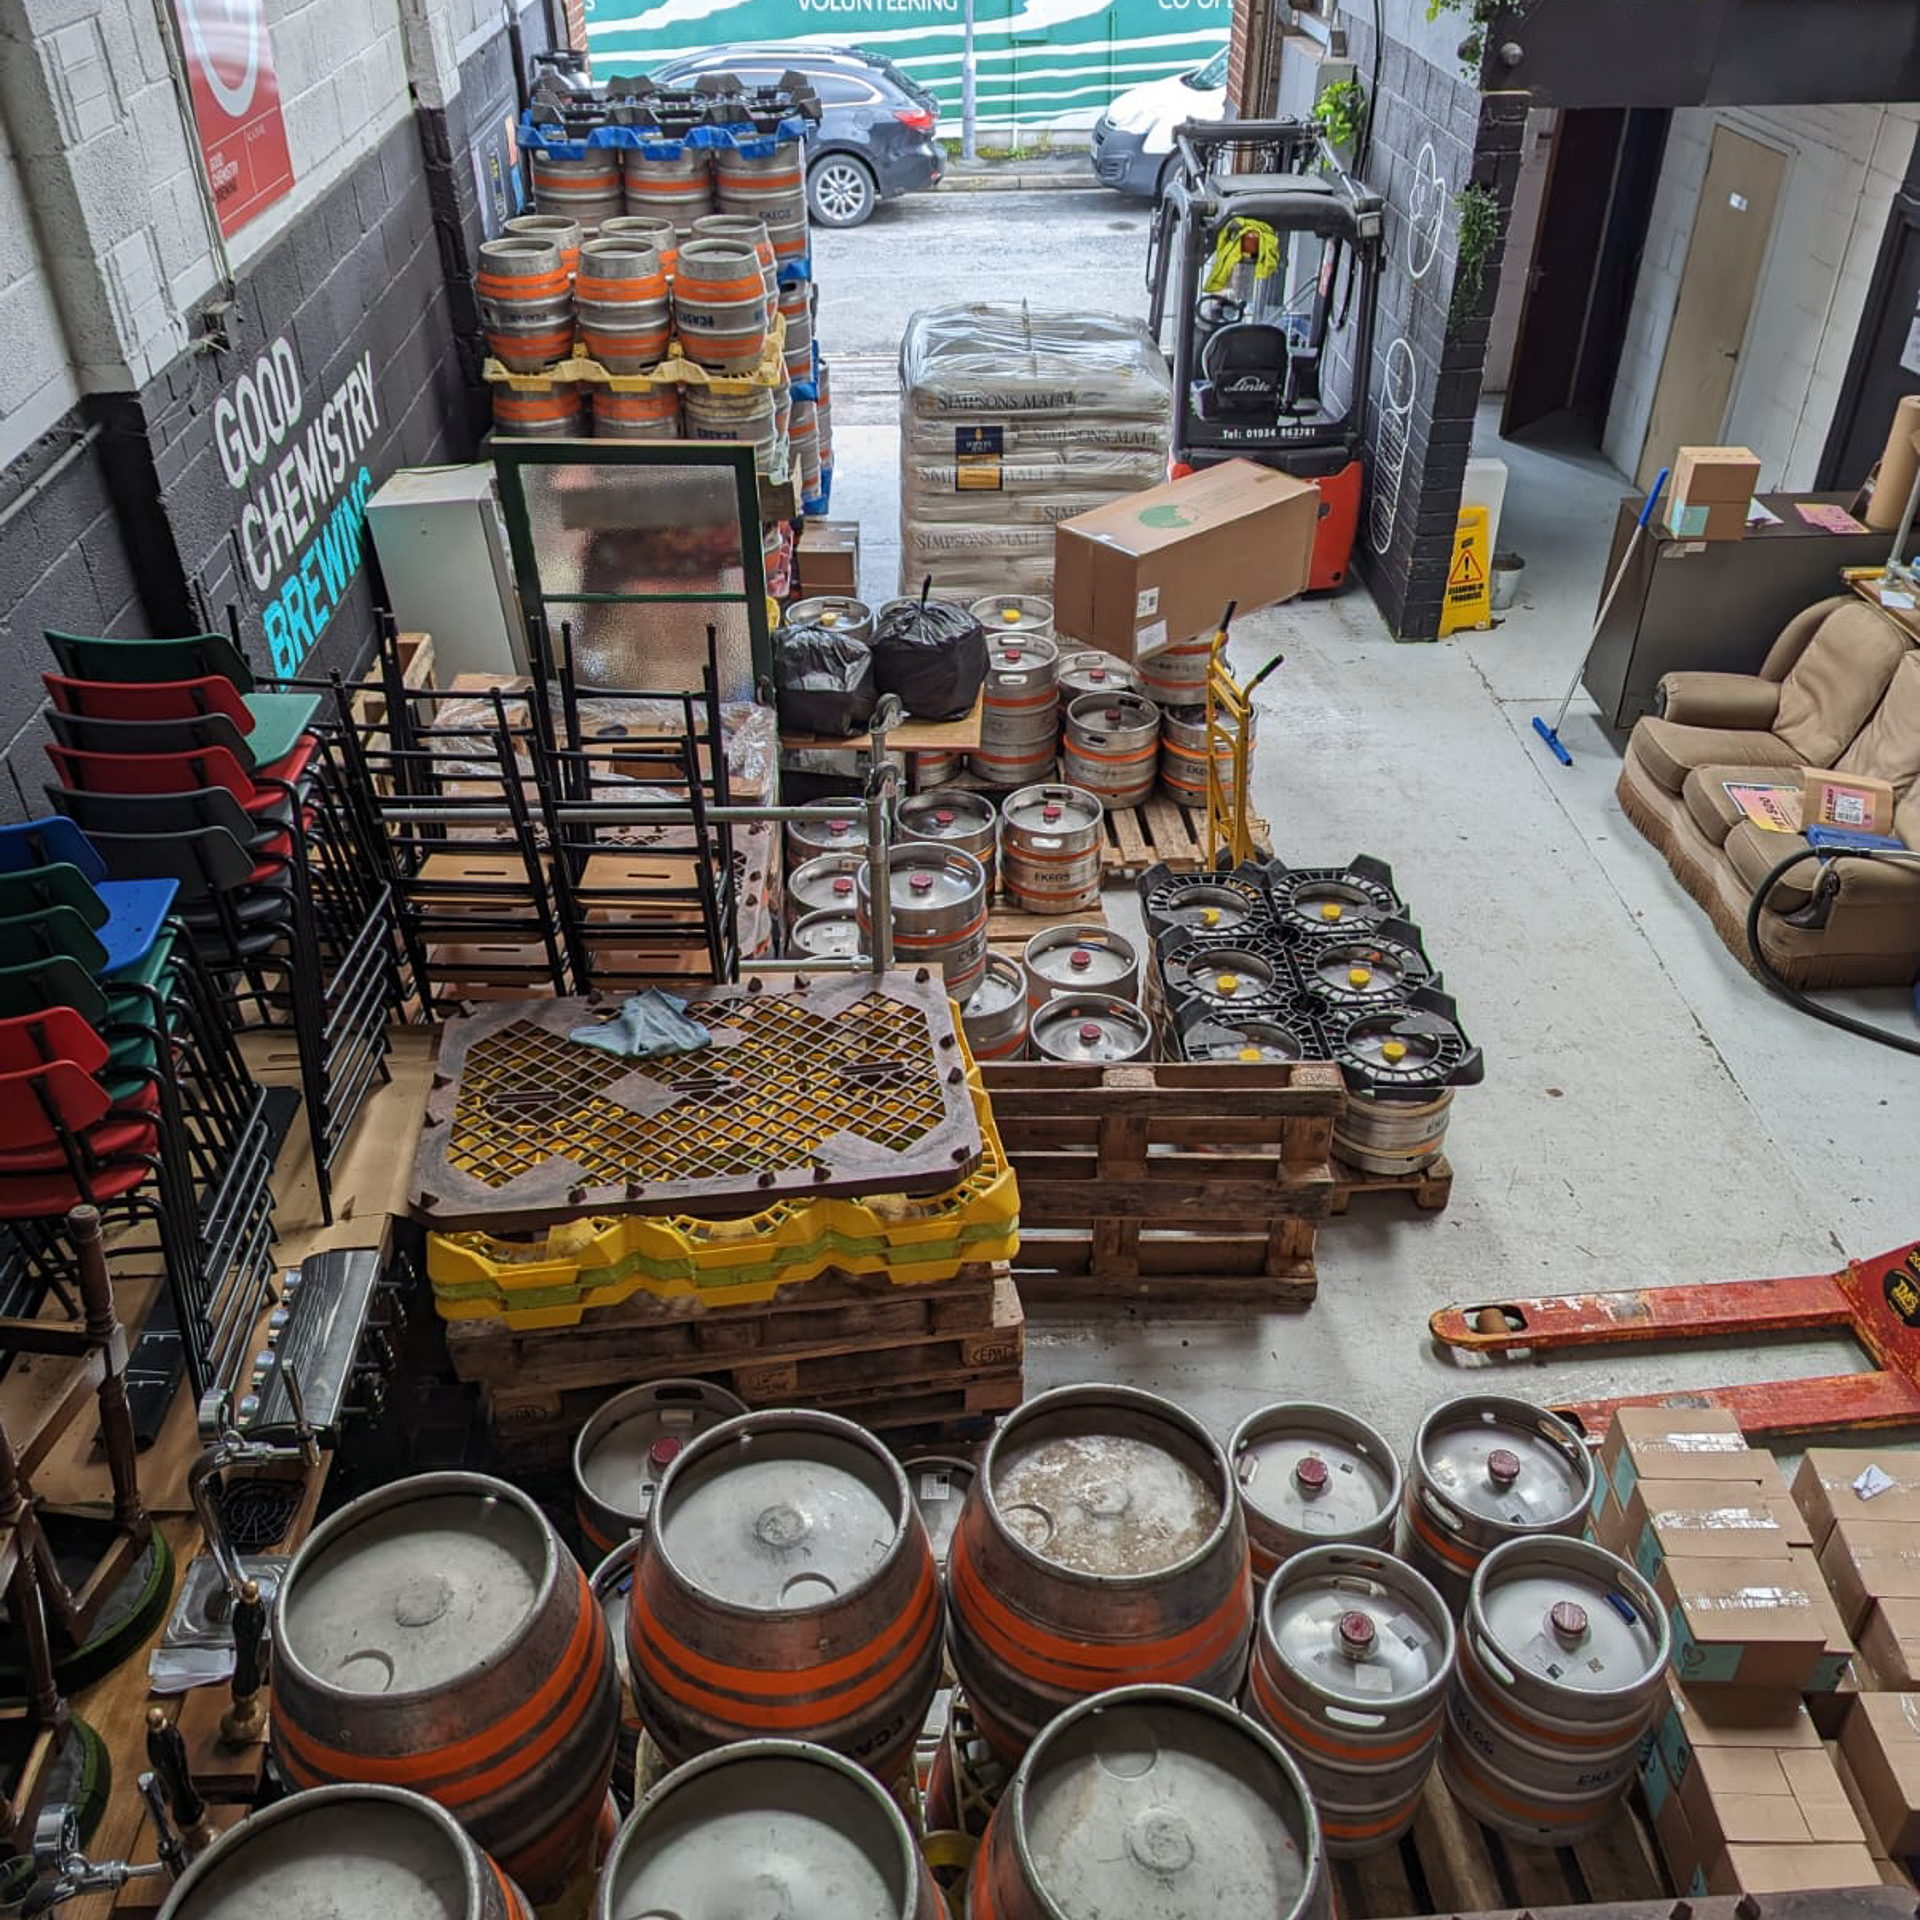 A FULL warehouse that used to house a Taproom